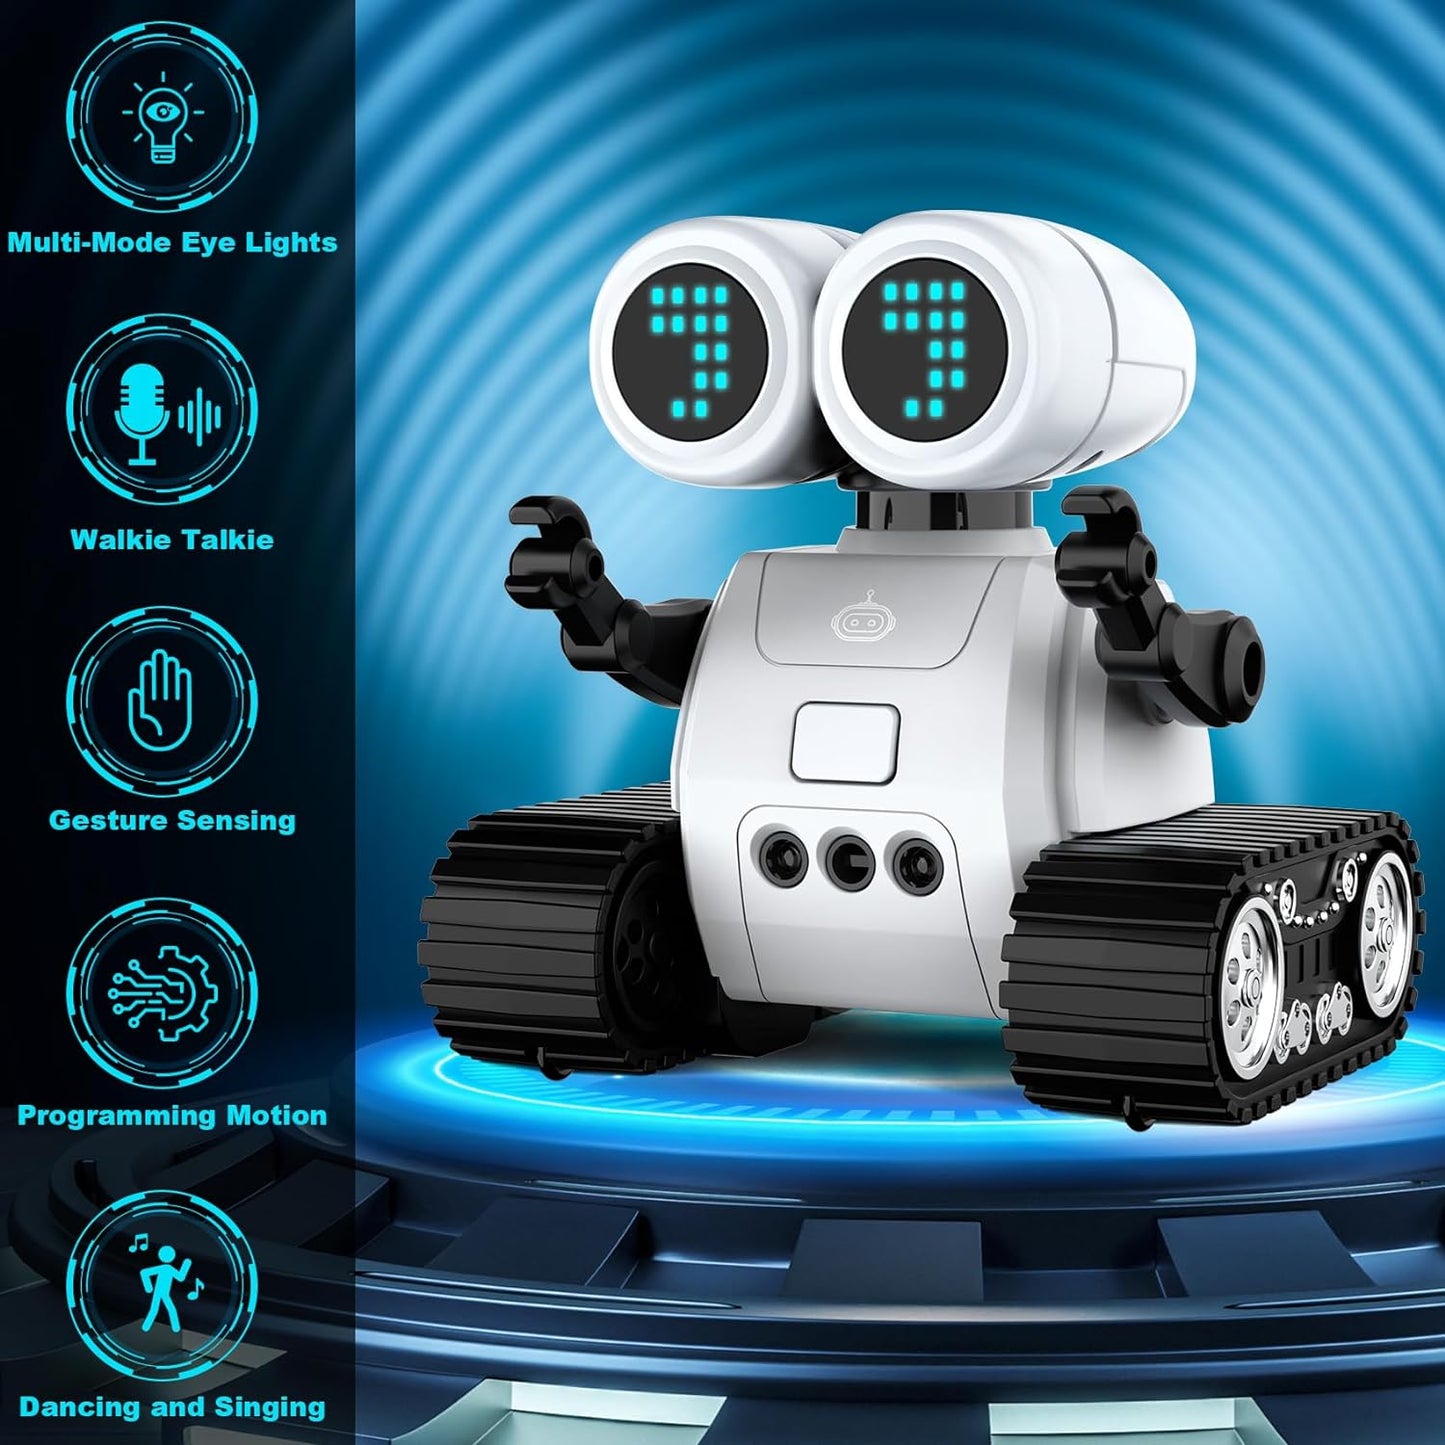 Robot Toys for 3 Years Old Boys Girls- Robots with Walkie-Talkie Function, Gesture Sensing, Flexible Head & Arms, Programming Motion, Dance Moves, Music, and Shining LED Eyes, Kids Toys Gifts